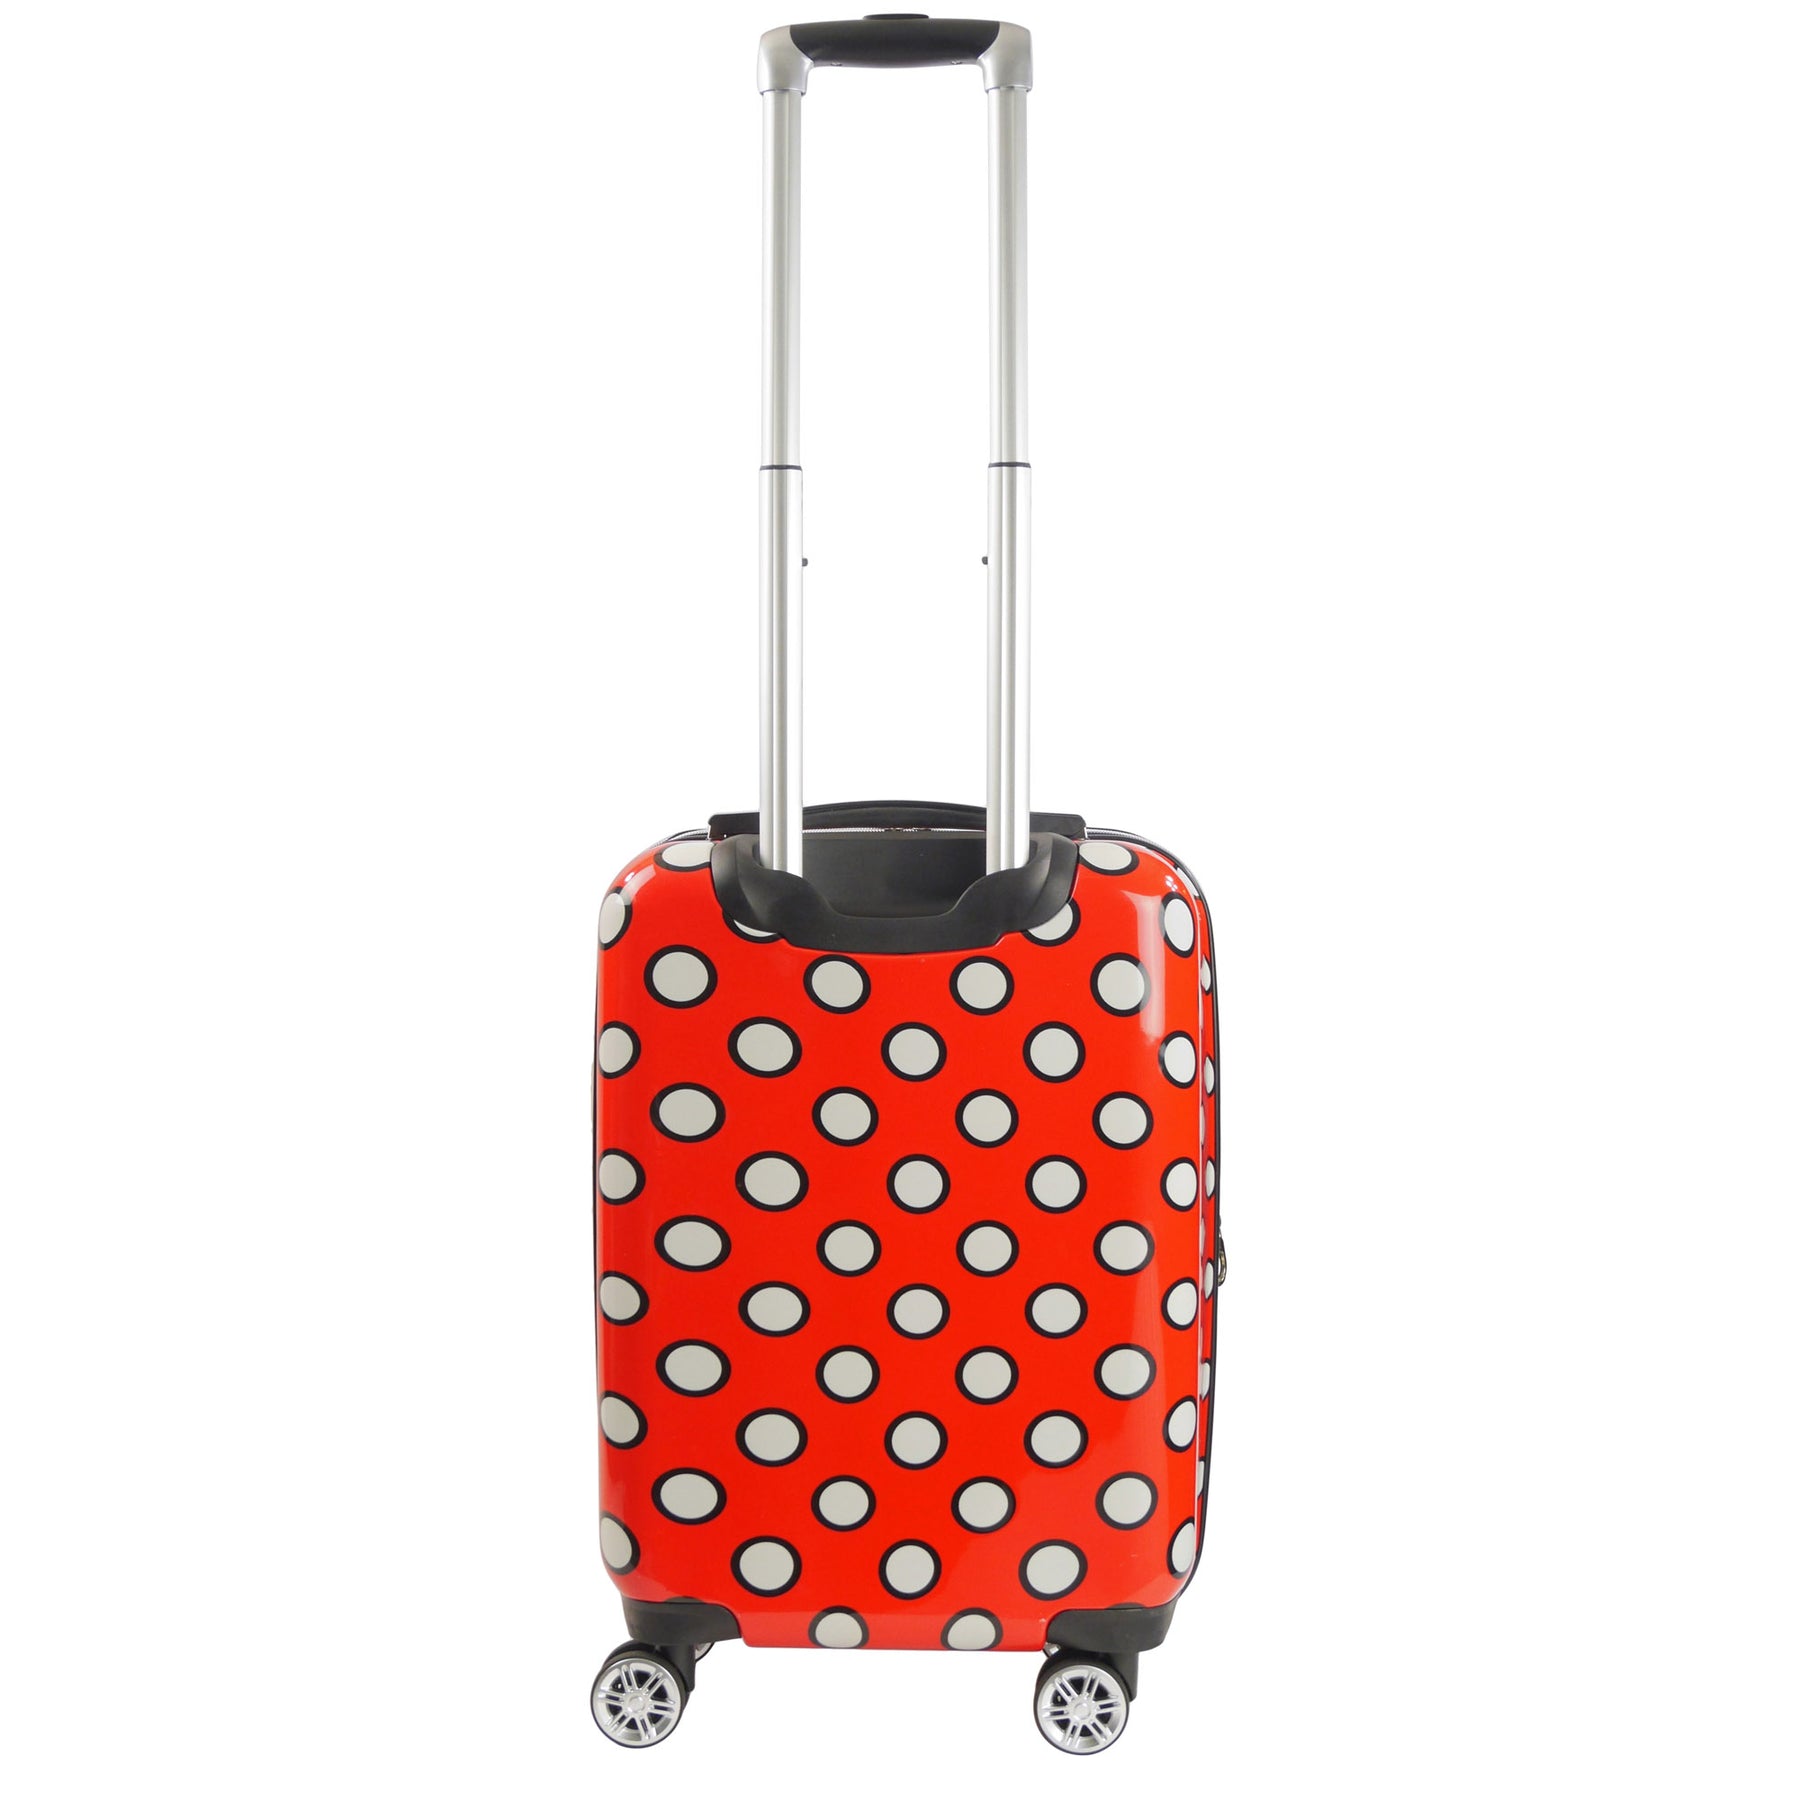 Disney Minnie Mouse Travel Patch 3 PC Luggage Set Red